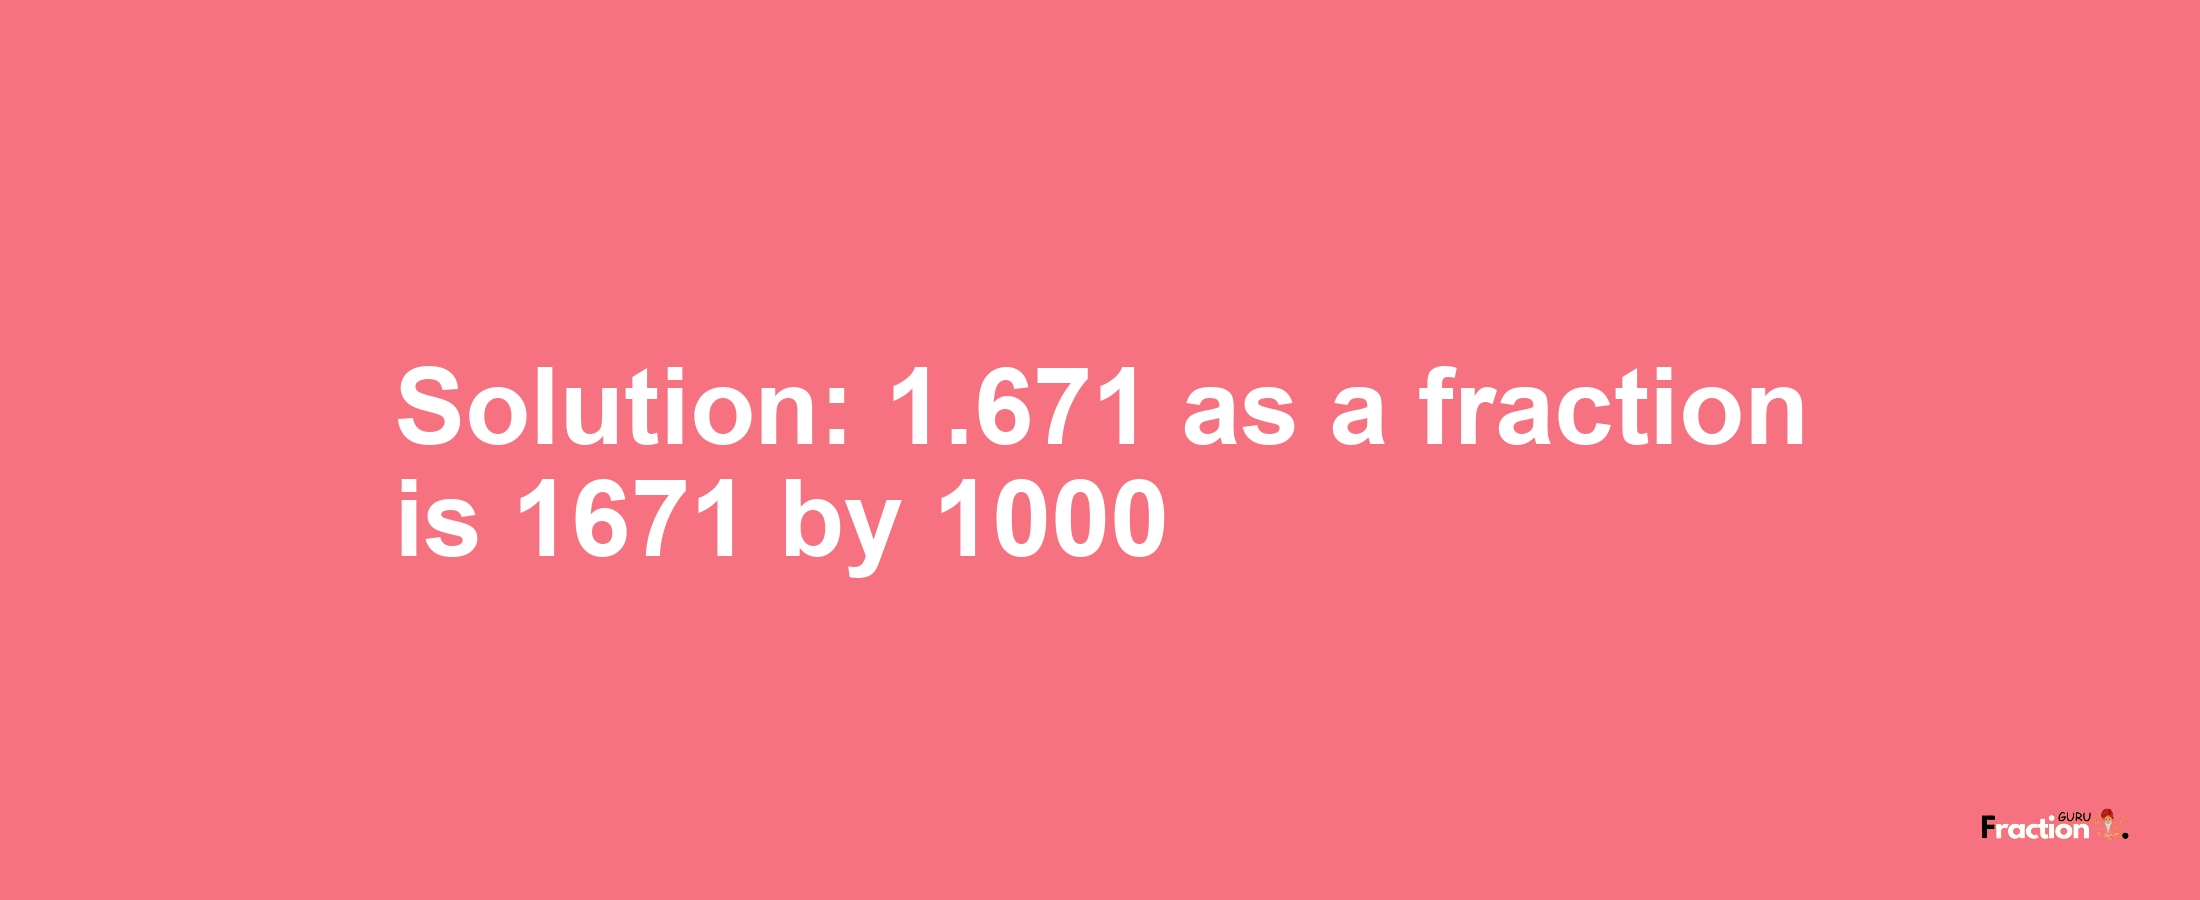 Solution:1.671 as a fraction is 1671/1000